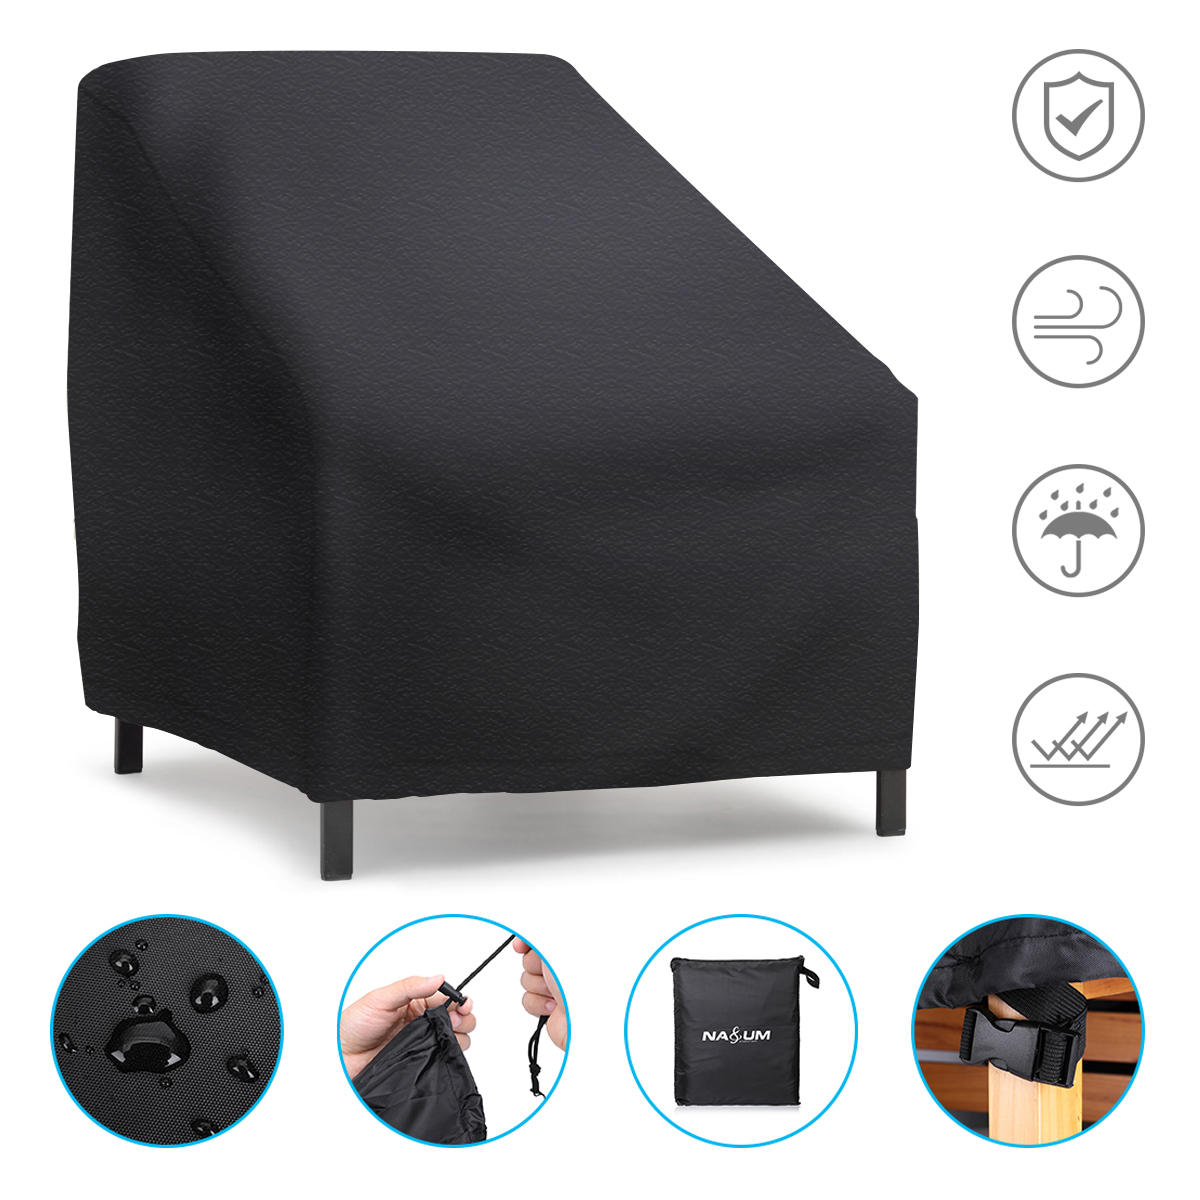 Waterproof Outdoor Chair Sofa Covers High-density Nylon Oxford Furniture Protection Case